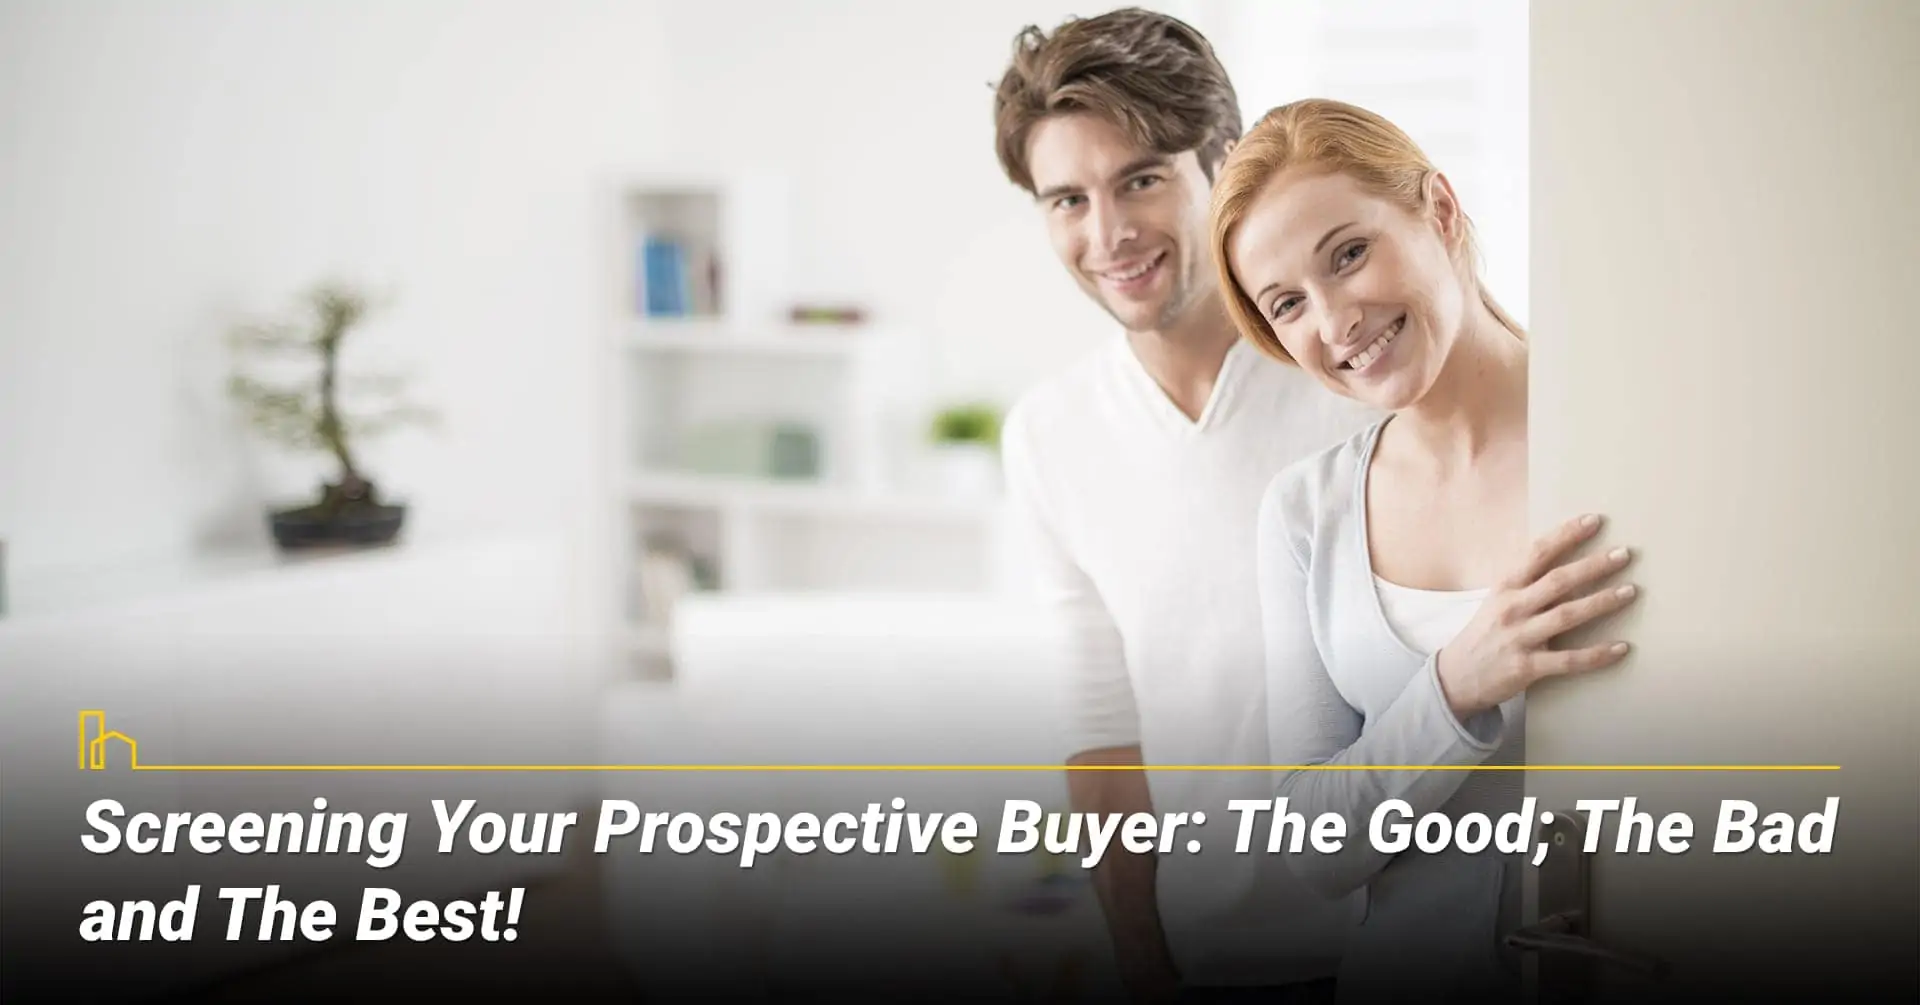 Screening Your Prospective Buyer: The Good; The Bad and The Best! carefully screen your potential buyers